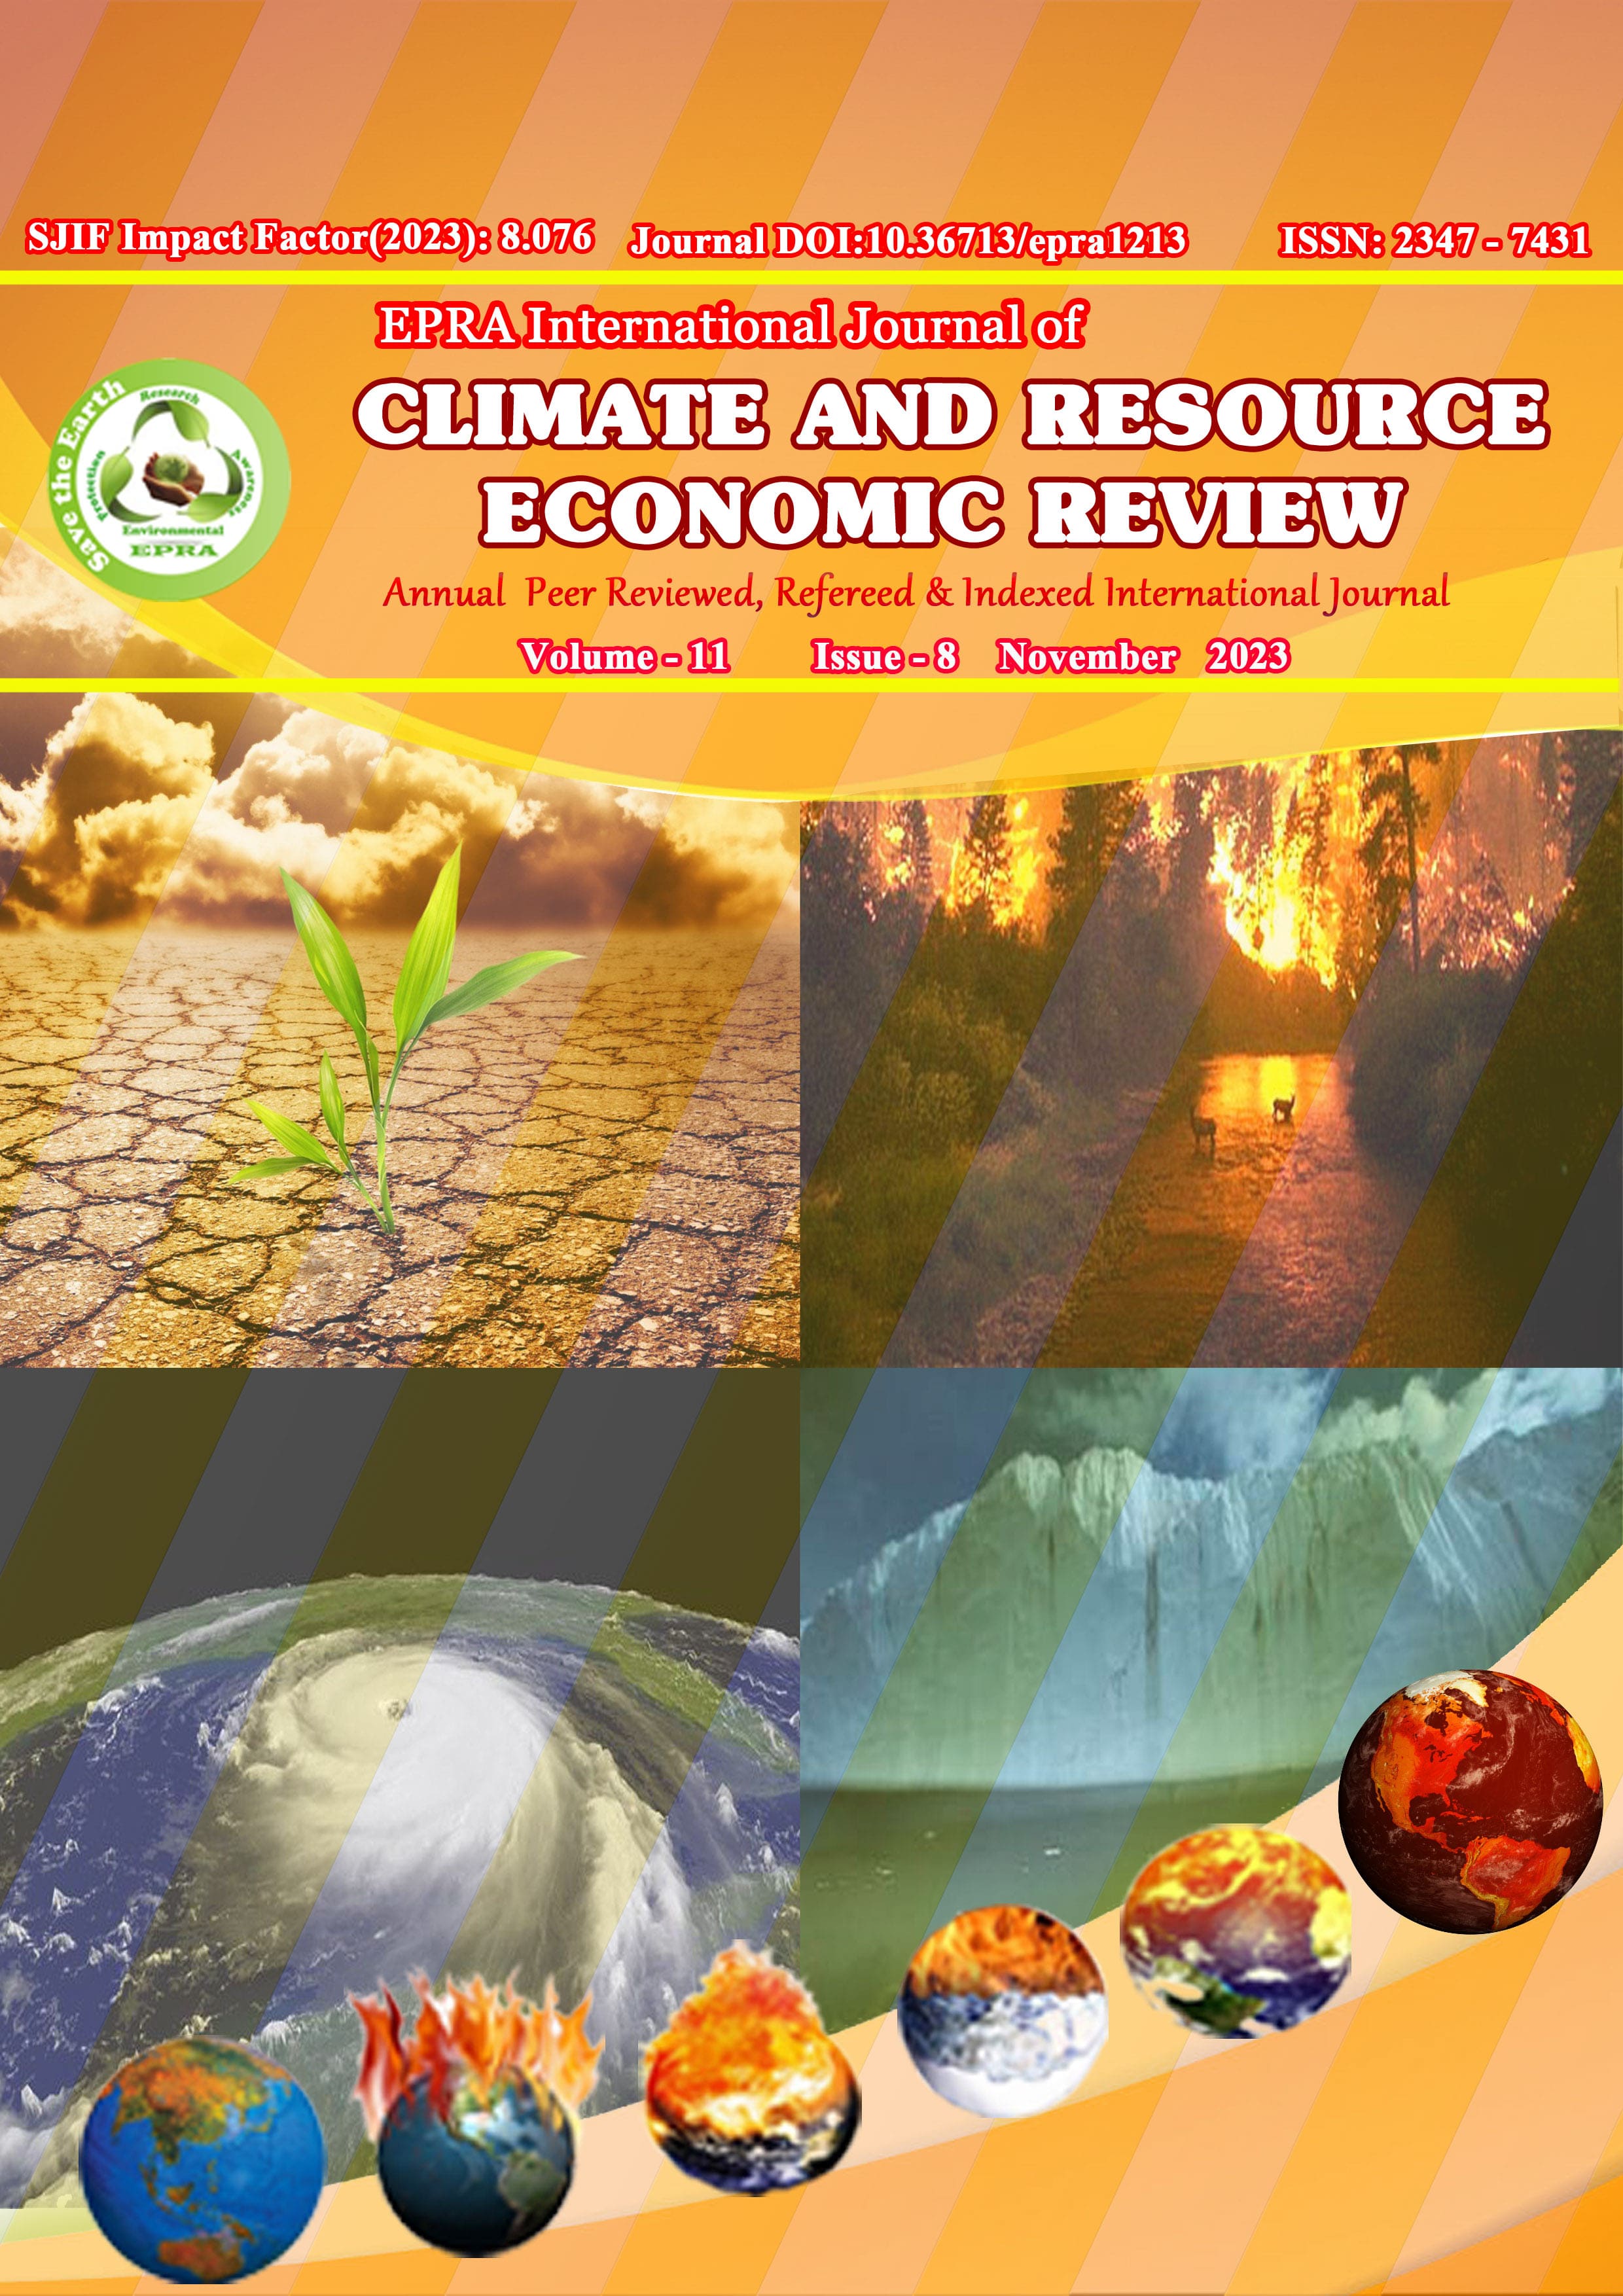 					View Vol. 11 No. 8 (2023): EPRA International Journal of Climate and Resource Economic Review(CRER)
				